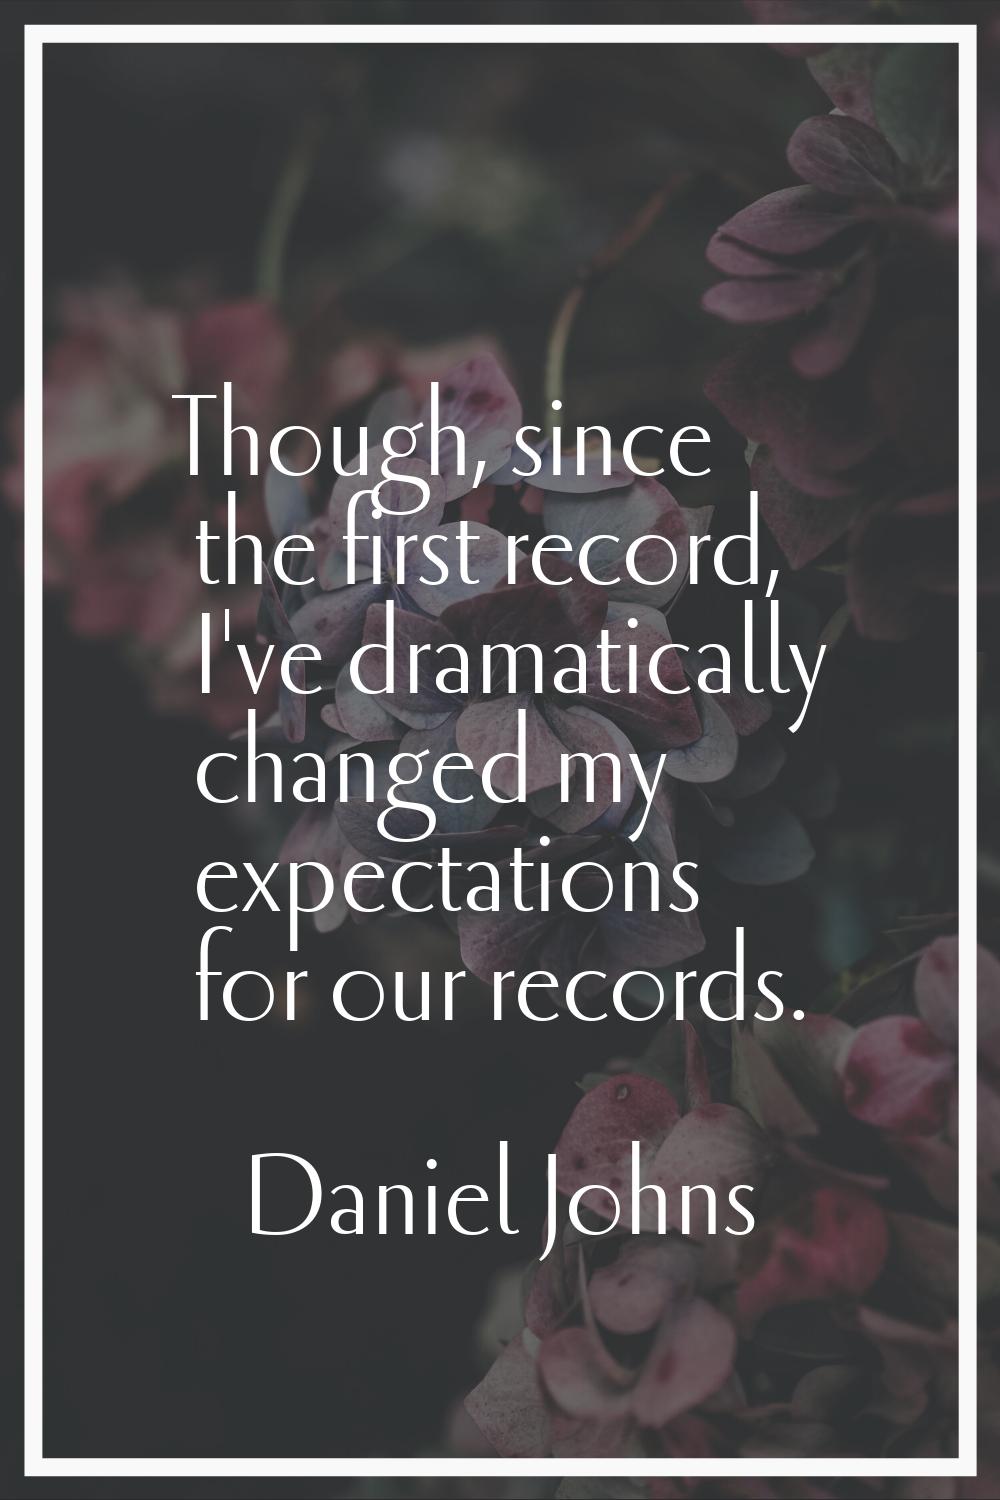 Though, since the first record, I've dramatically changed my expectations for our records.